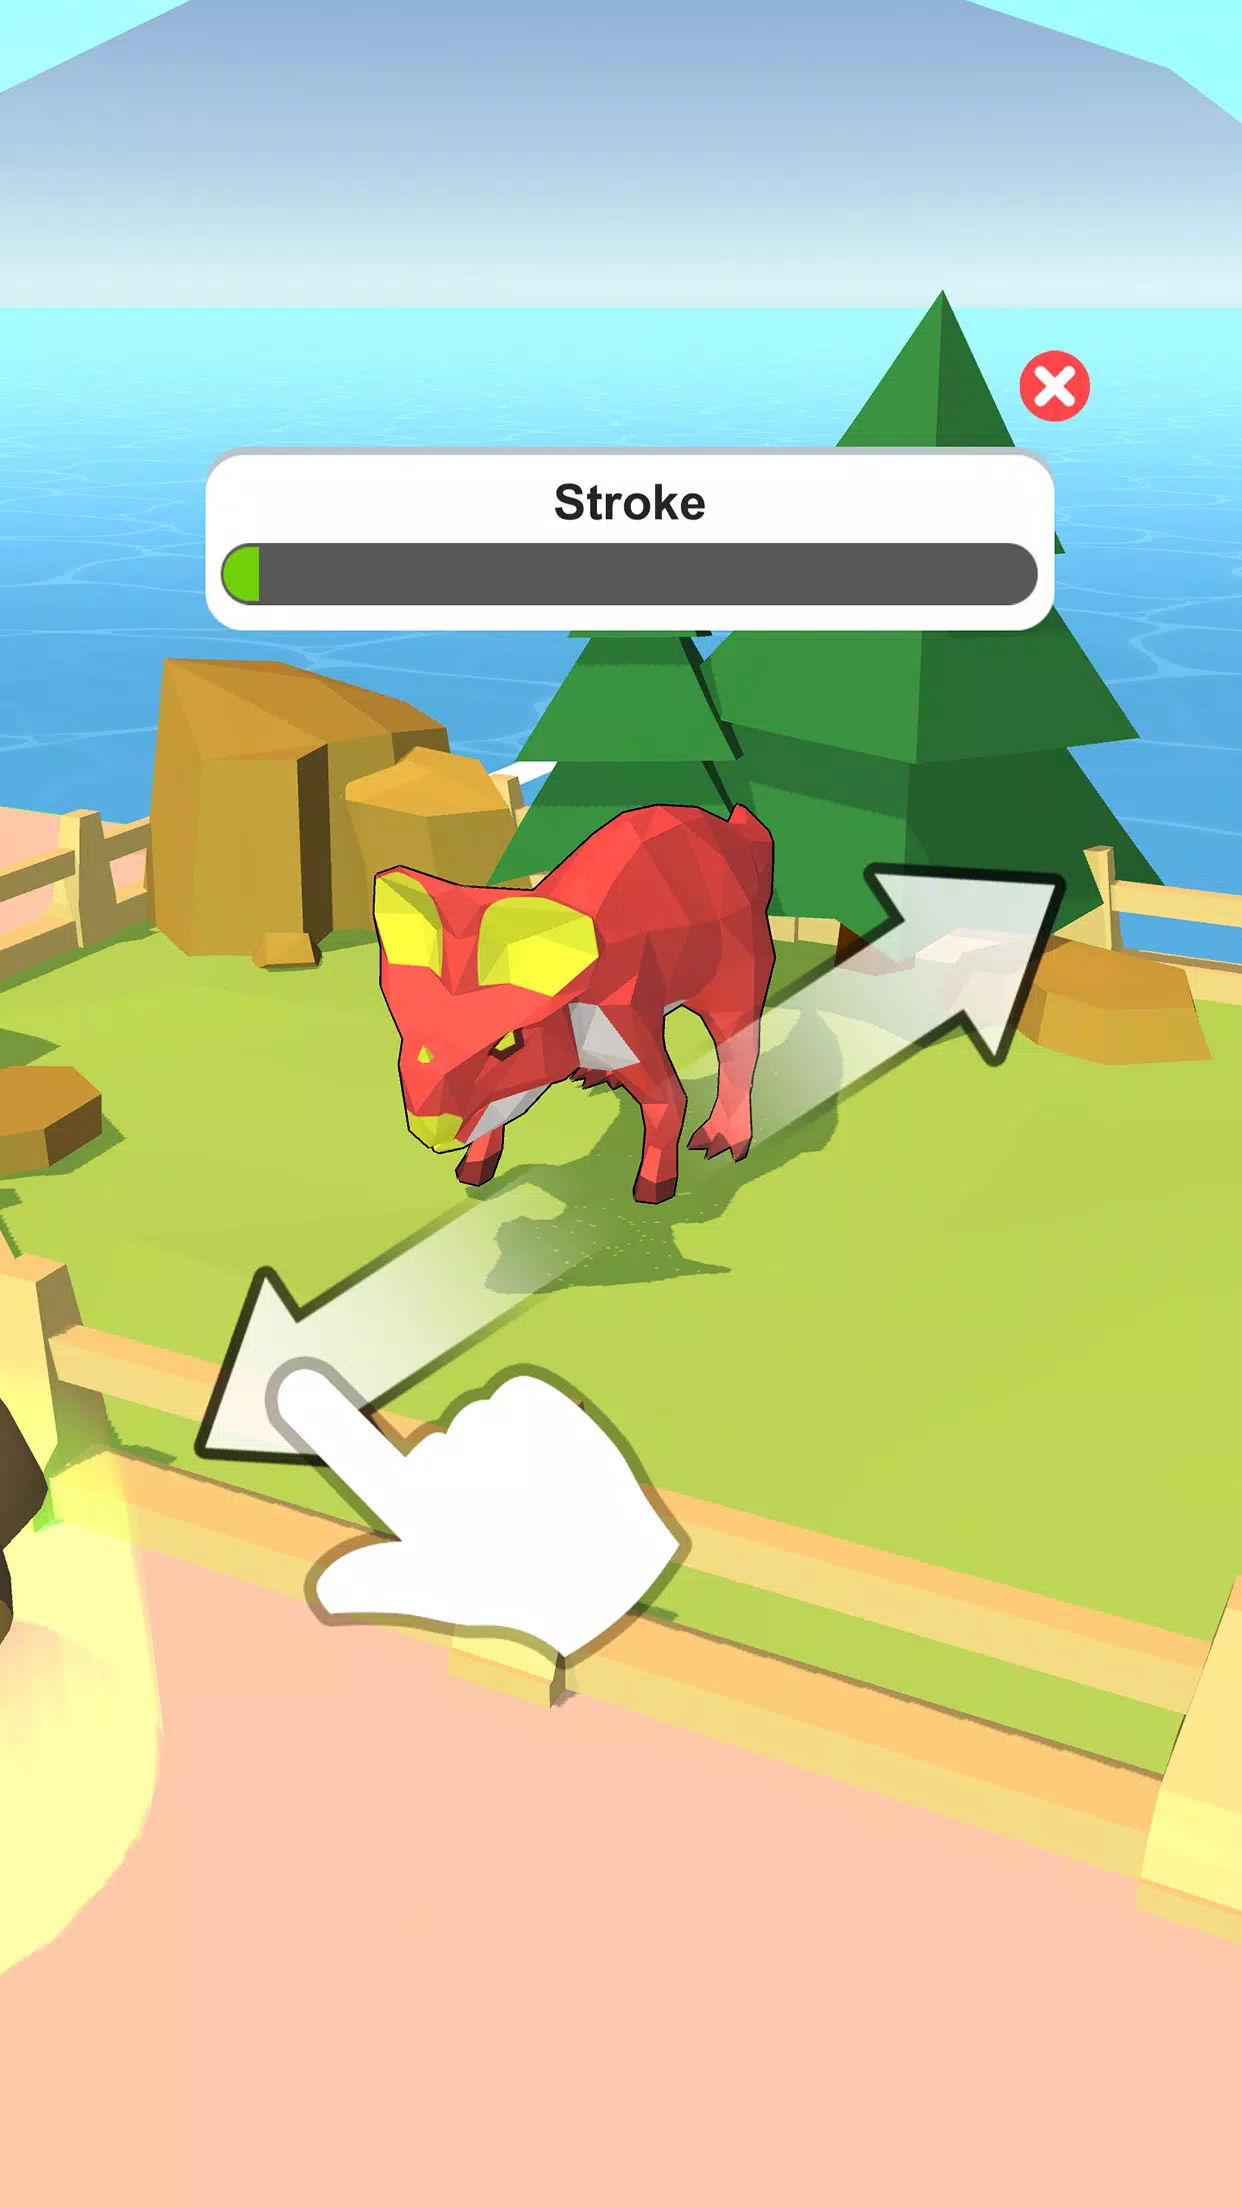 Dino Tycoon - 3D Building Game para Android - Download